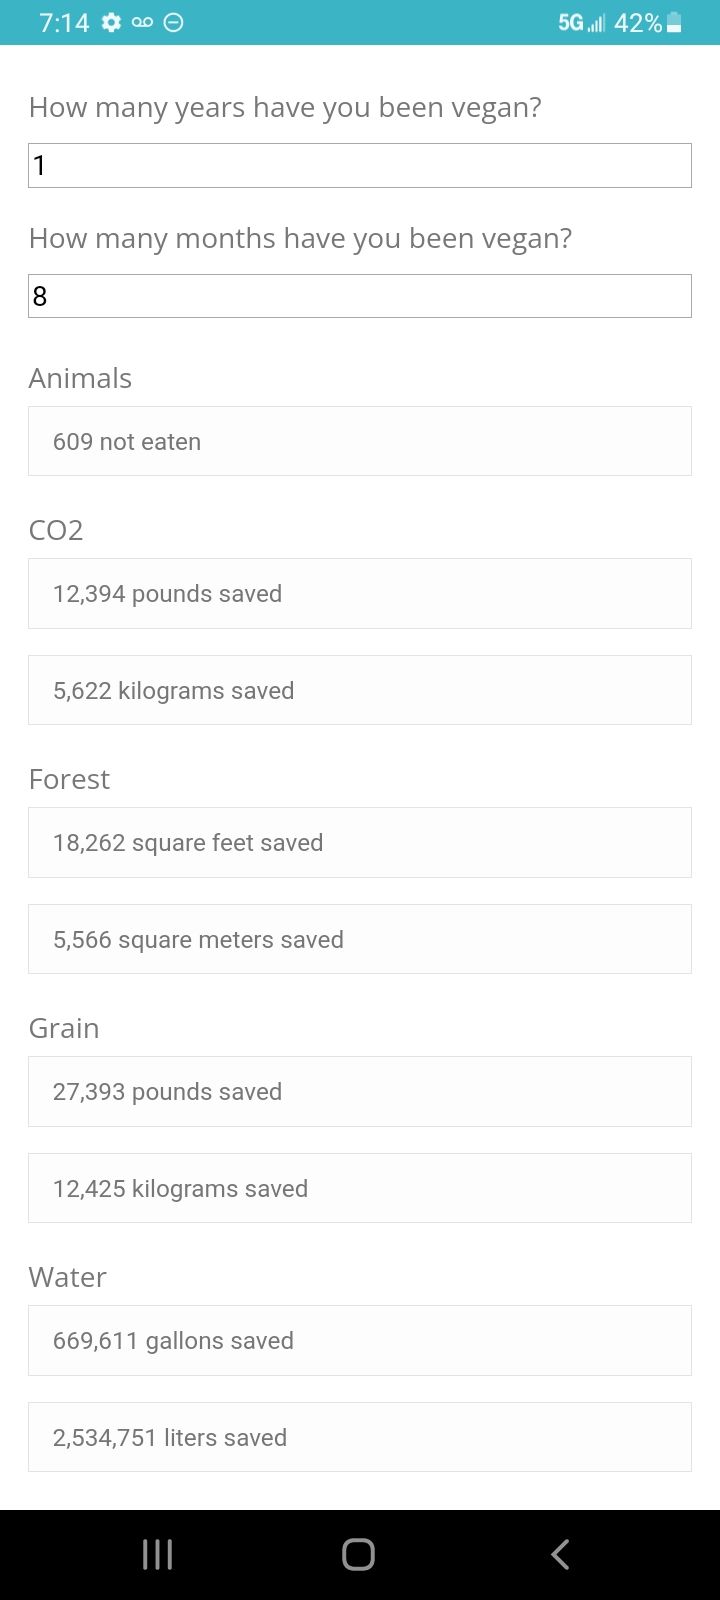 Vegan Calculator tells you how much good your veganism is doing for the planet.